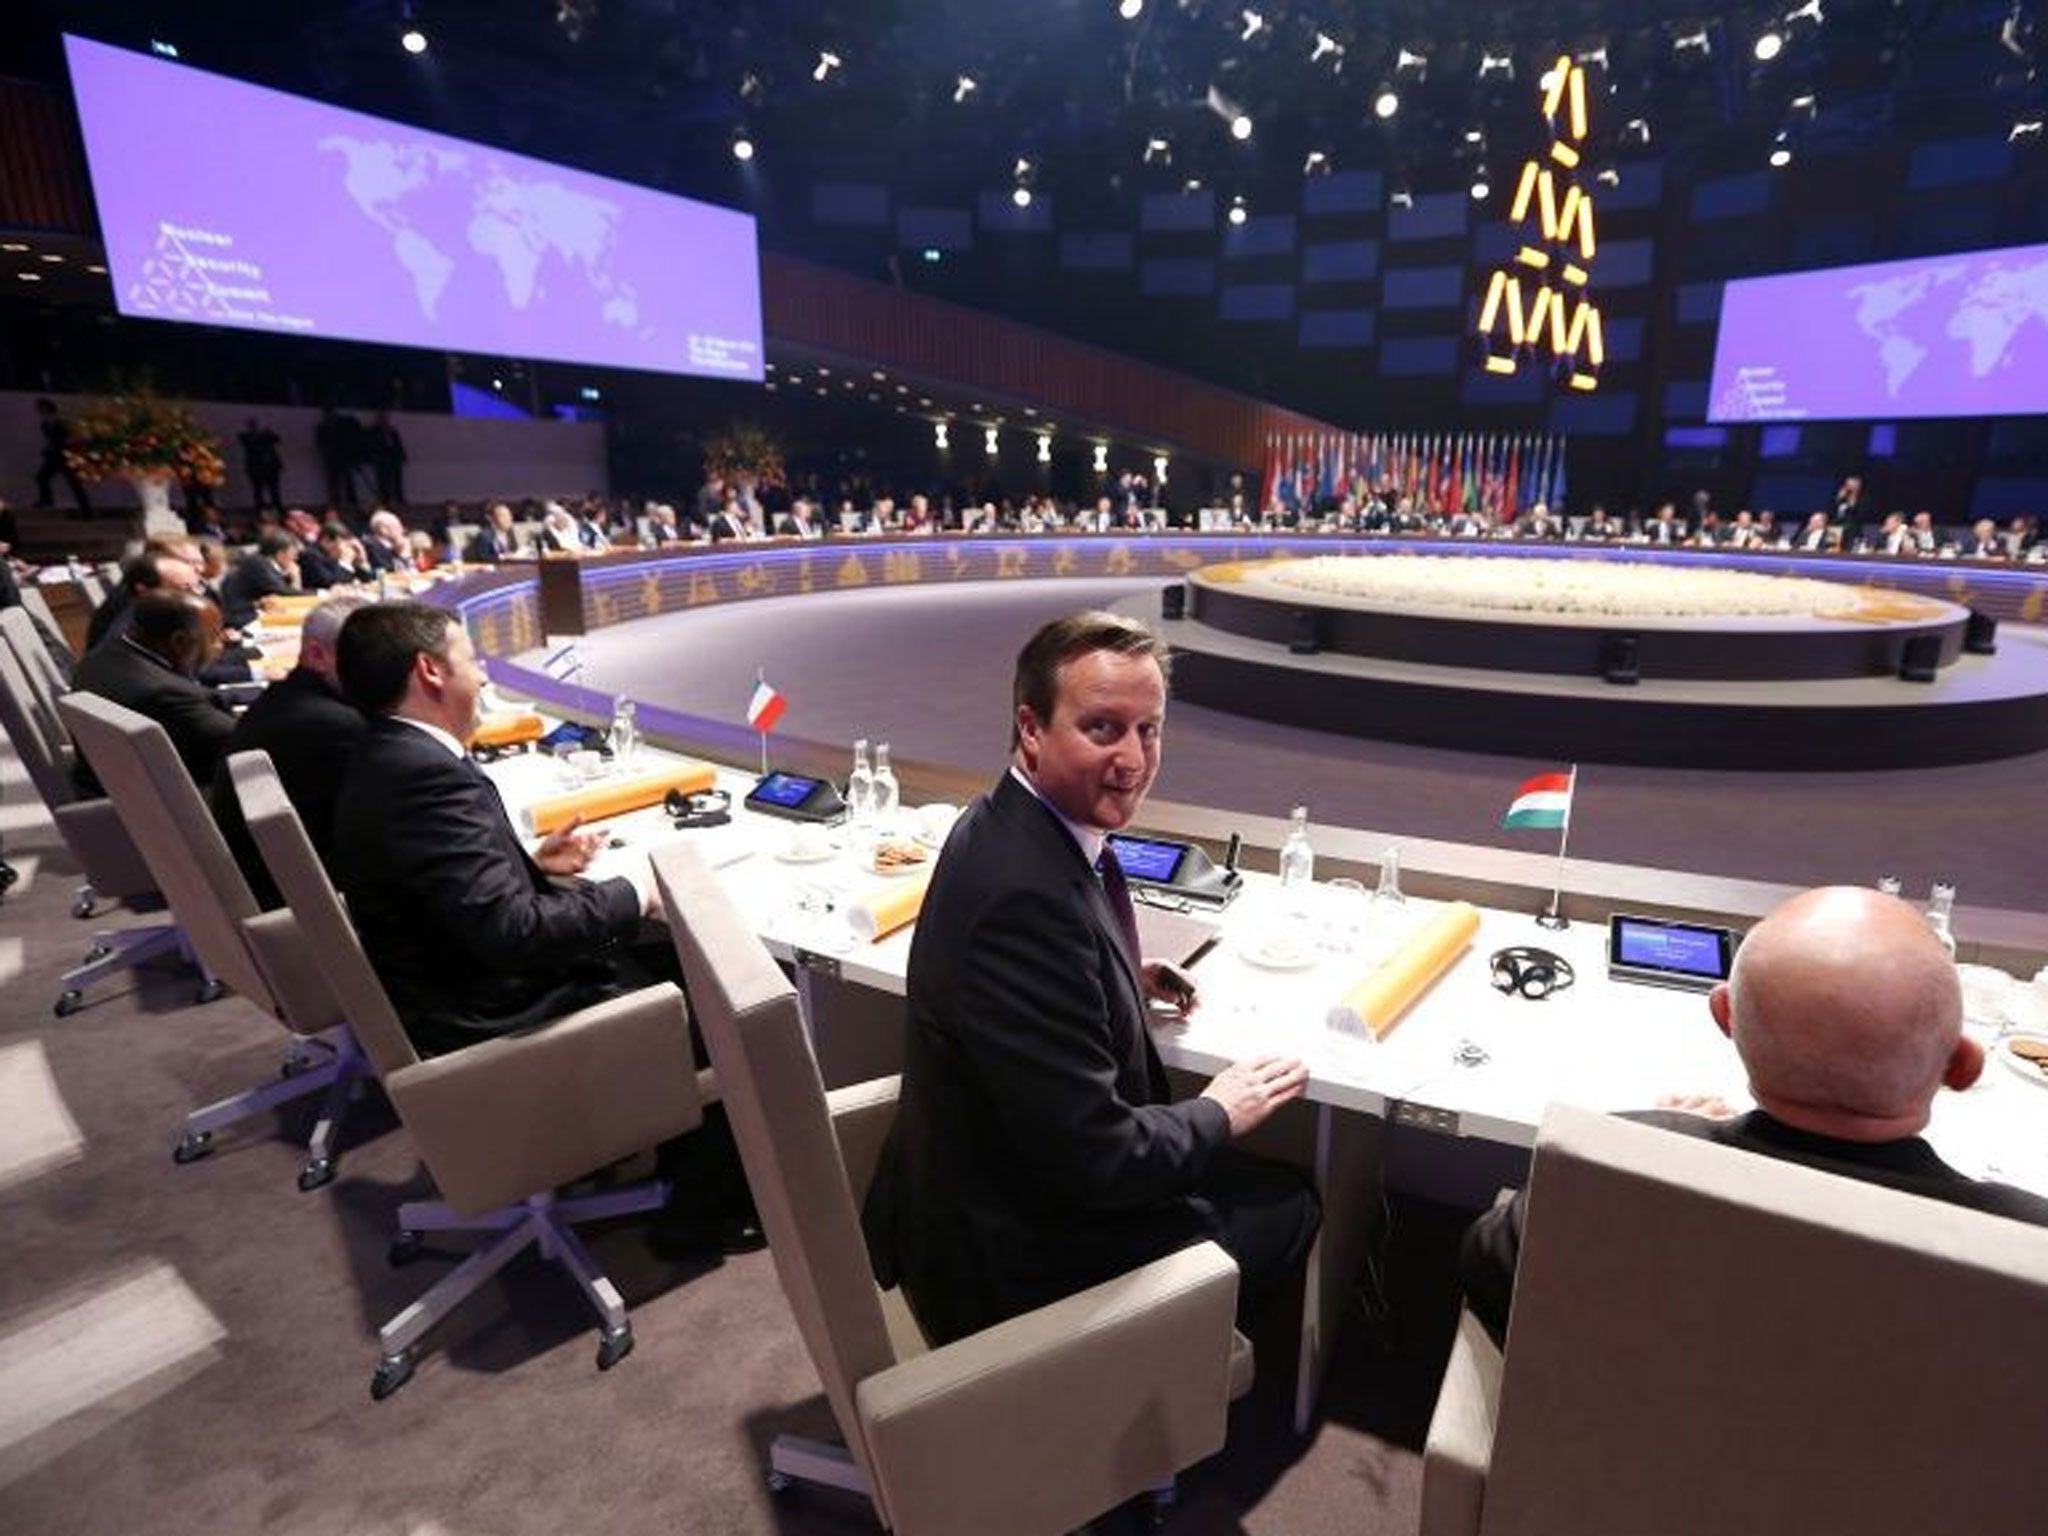 David Cameron in the plenary room at the Nuclear Security Summit 2014, where female catering staff are not setting foot.